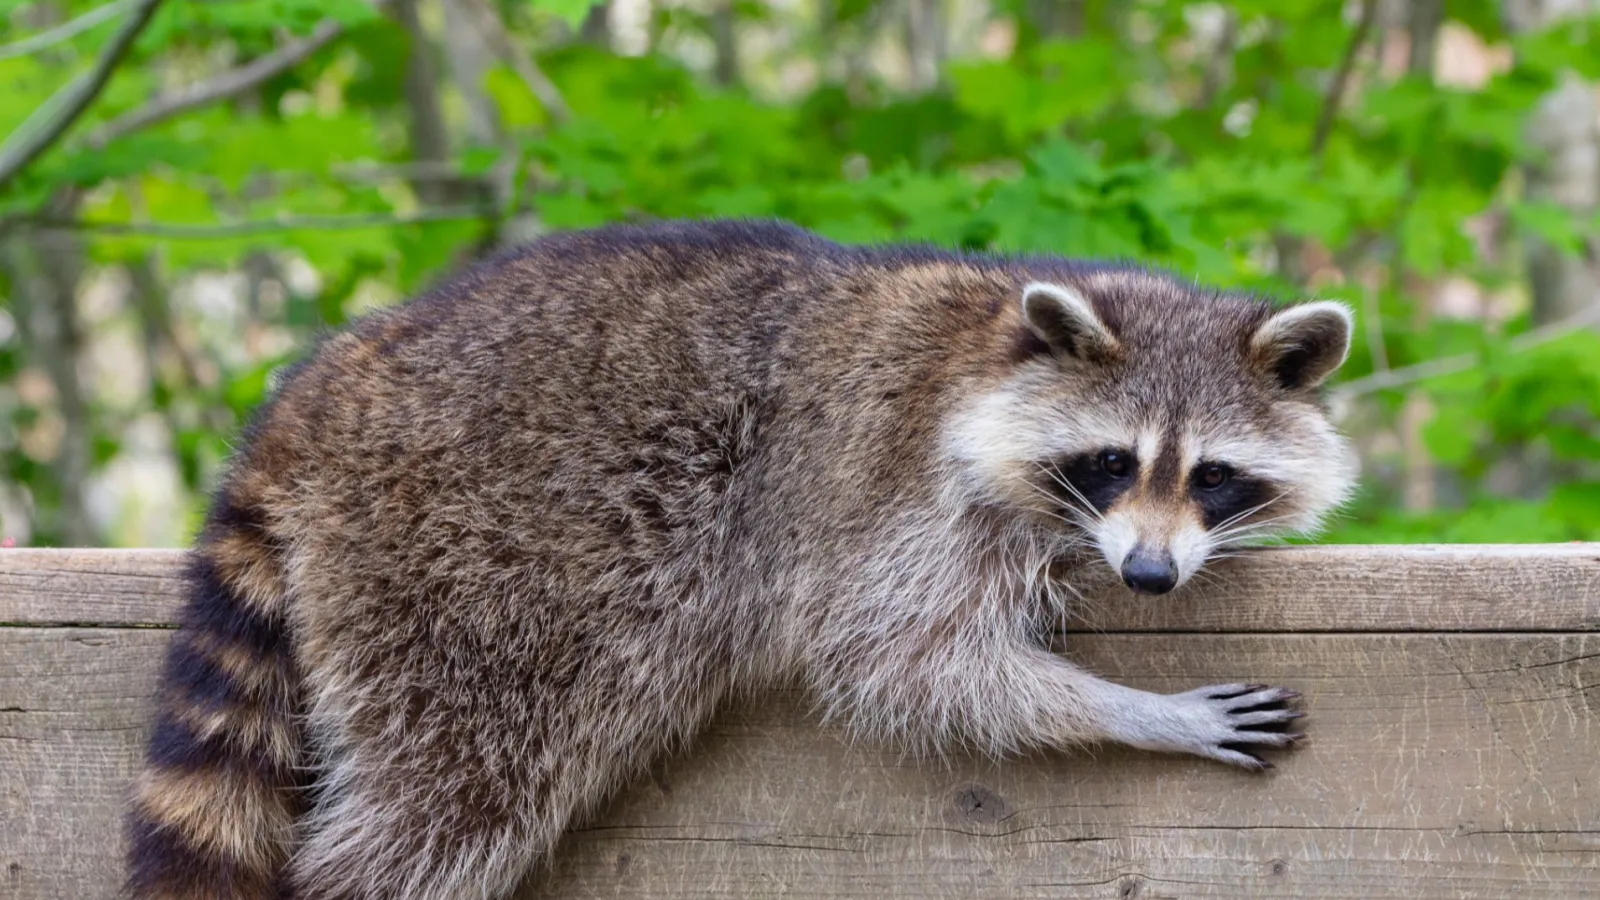 a raccoon on a wooden bench